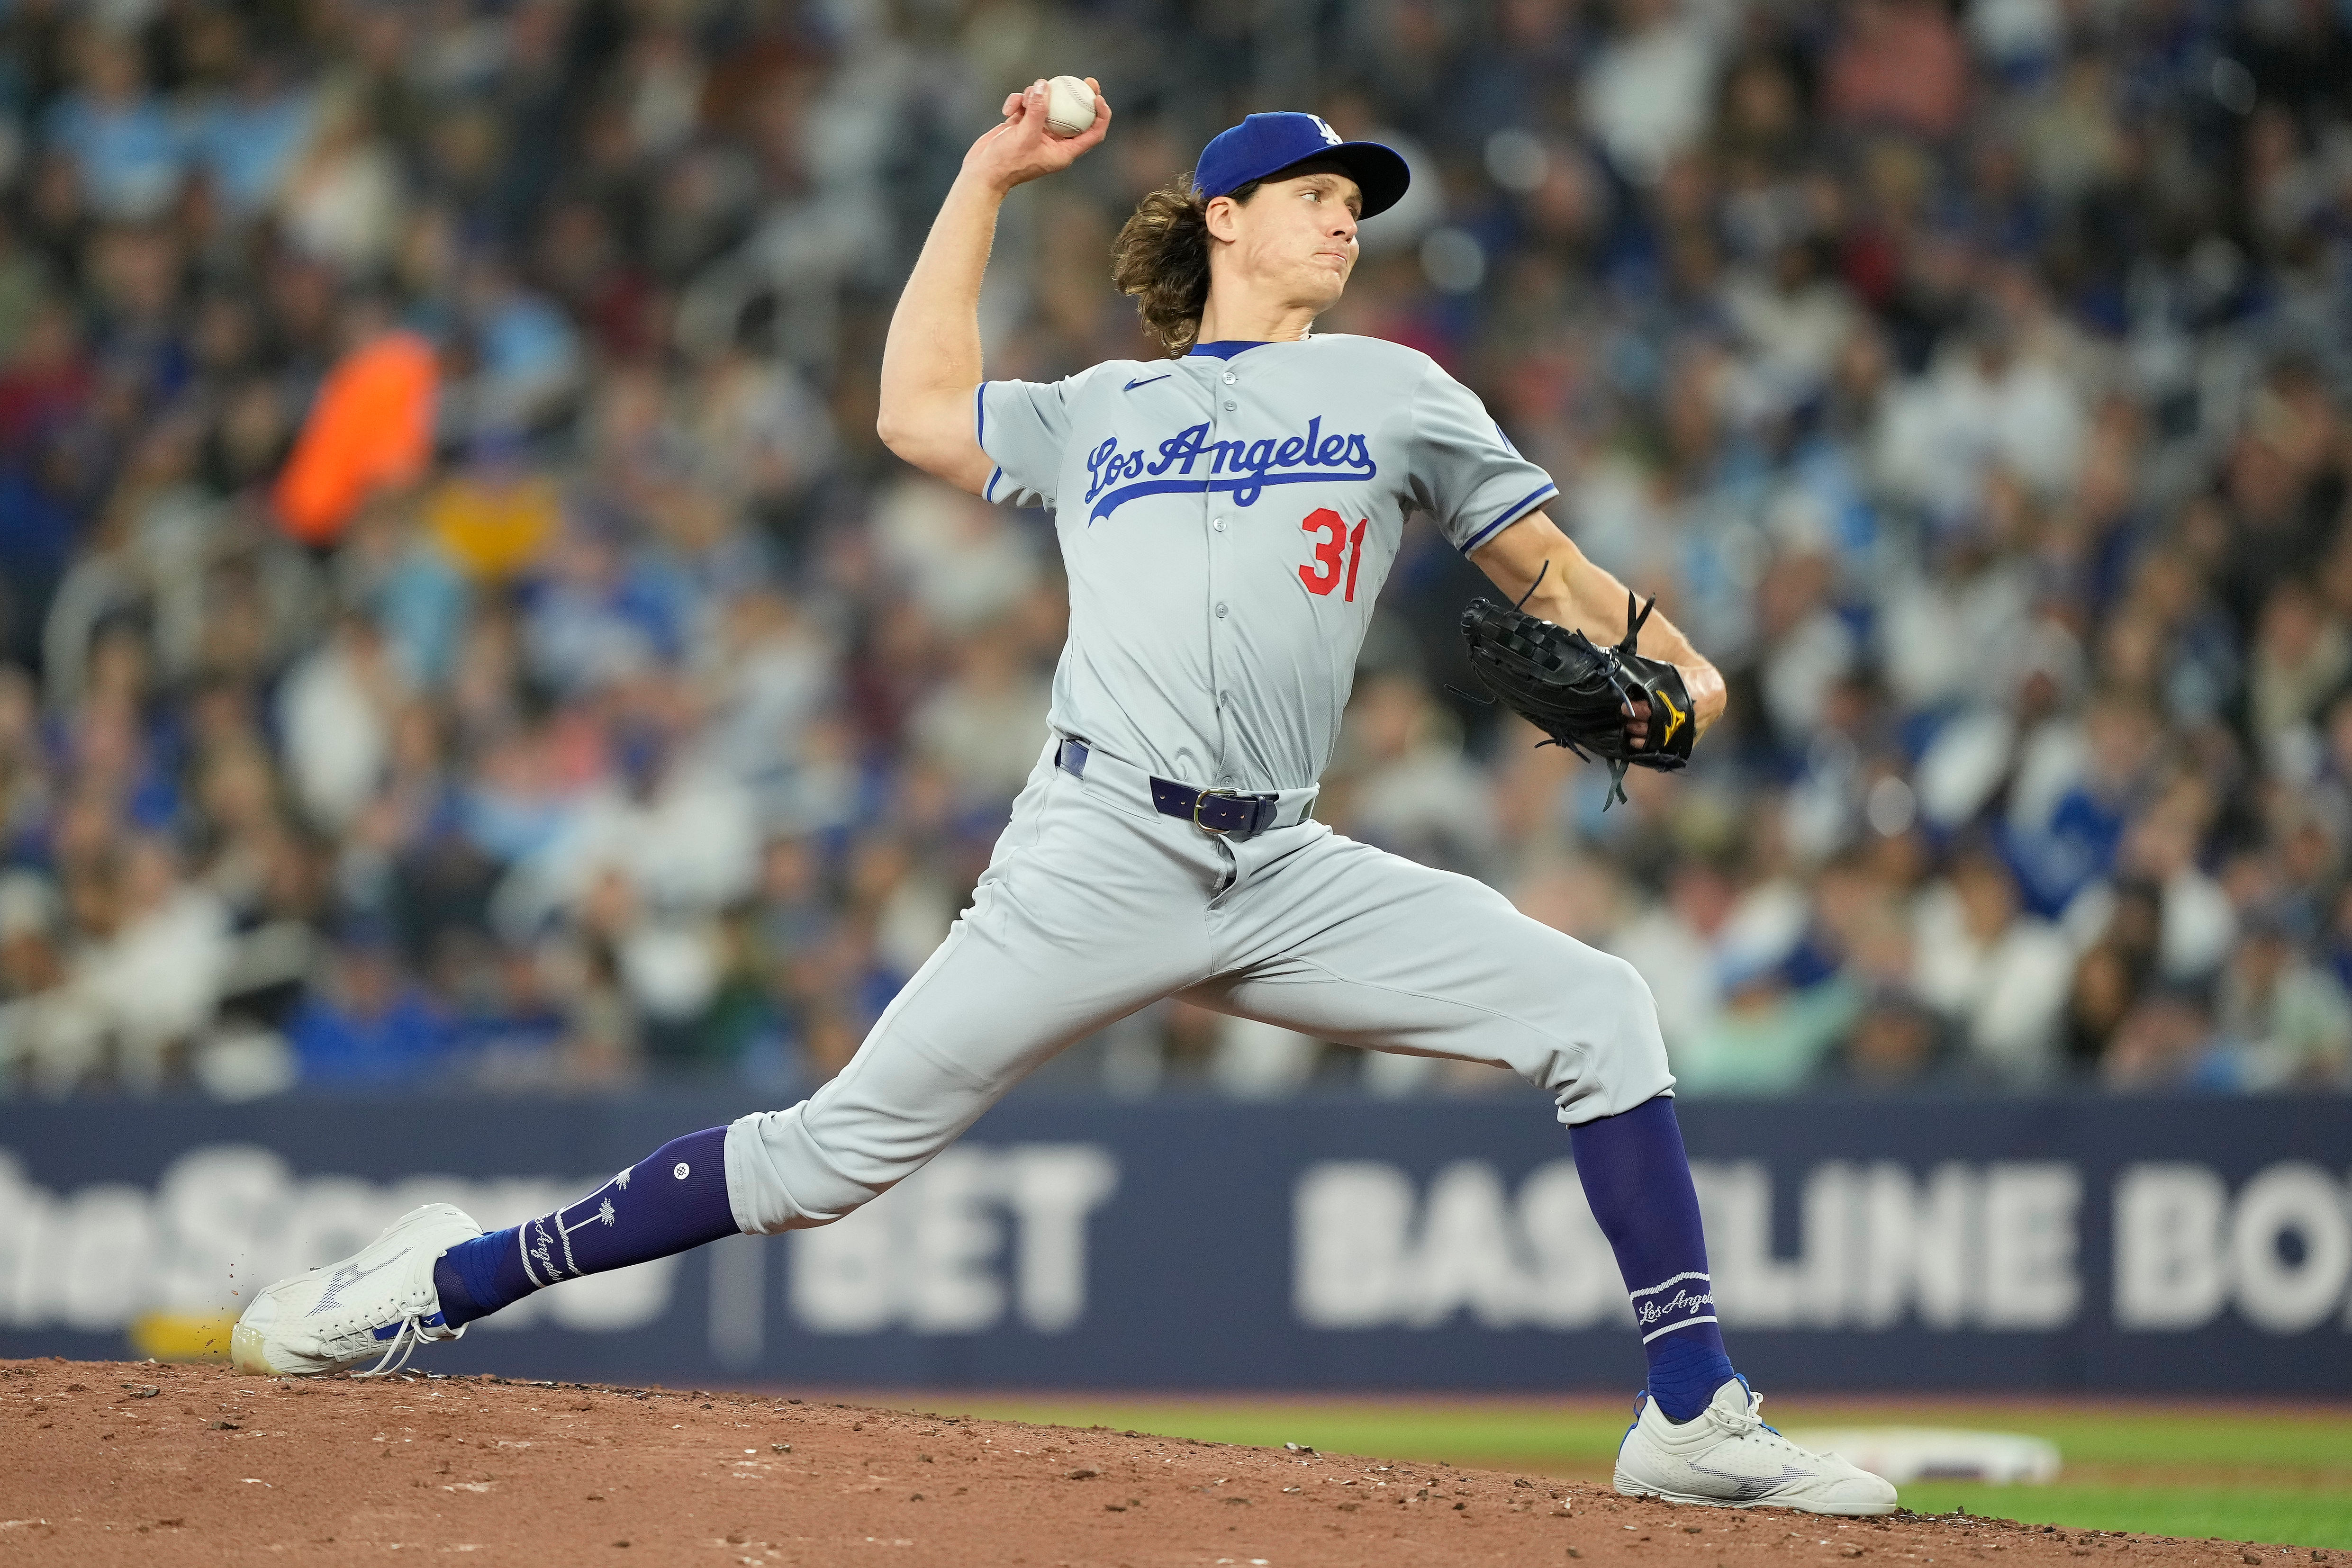 Tyler Glasnow has pitched like a true ace for the Dodgers